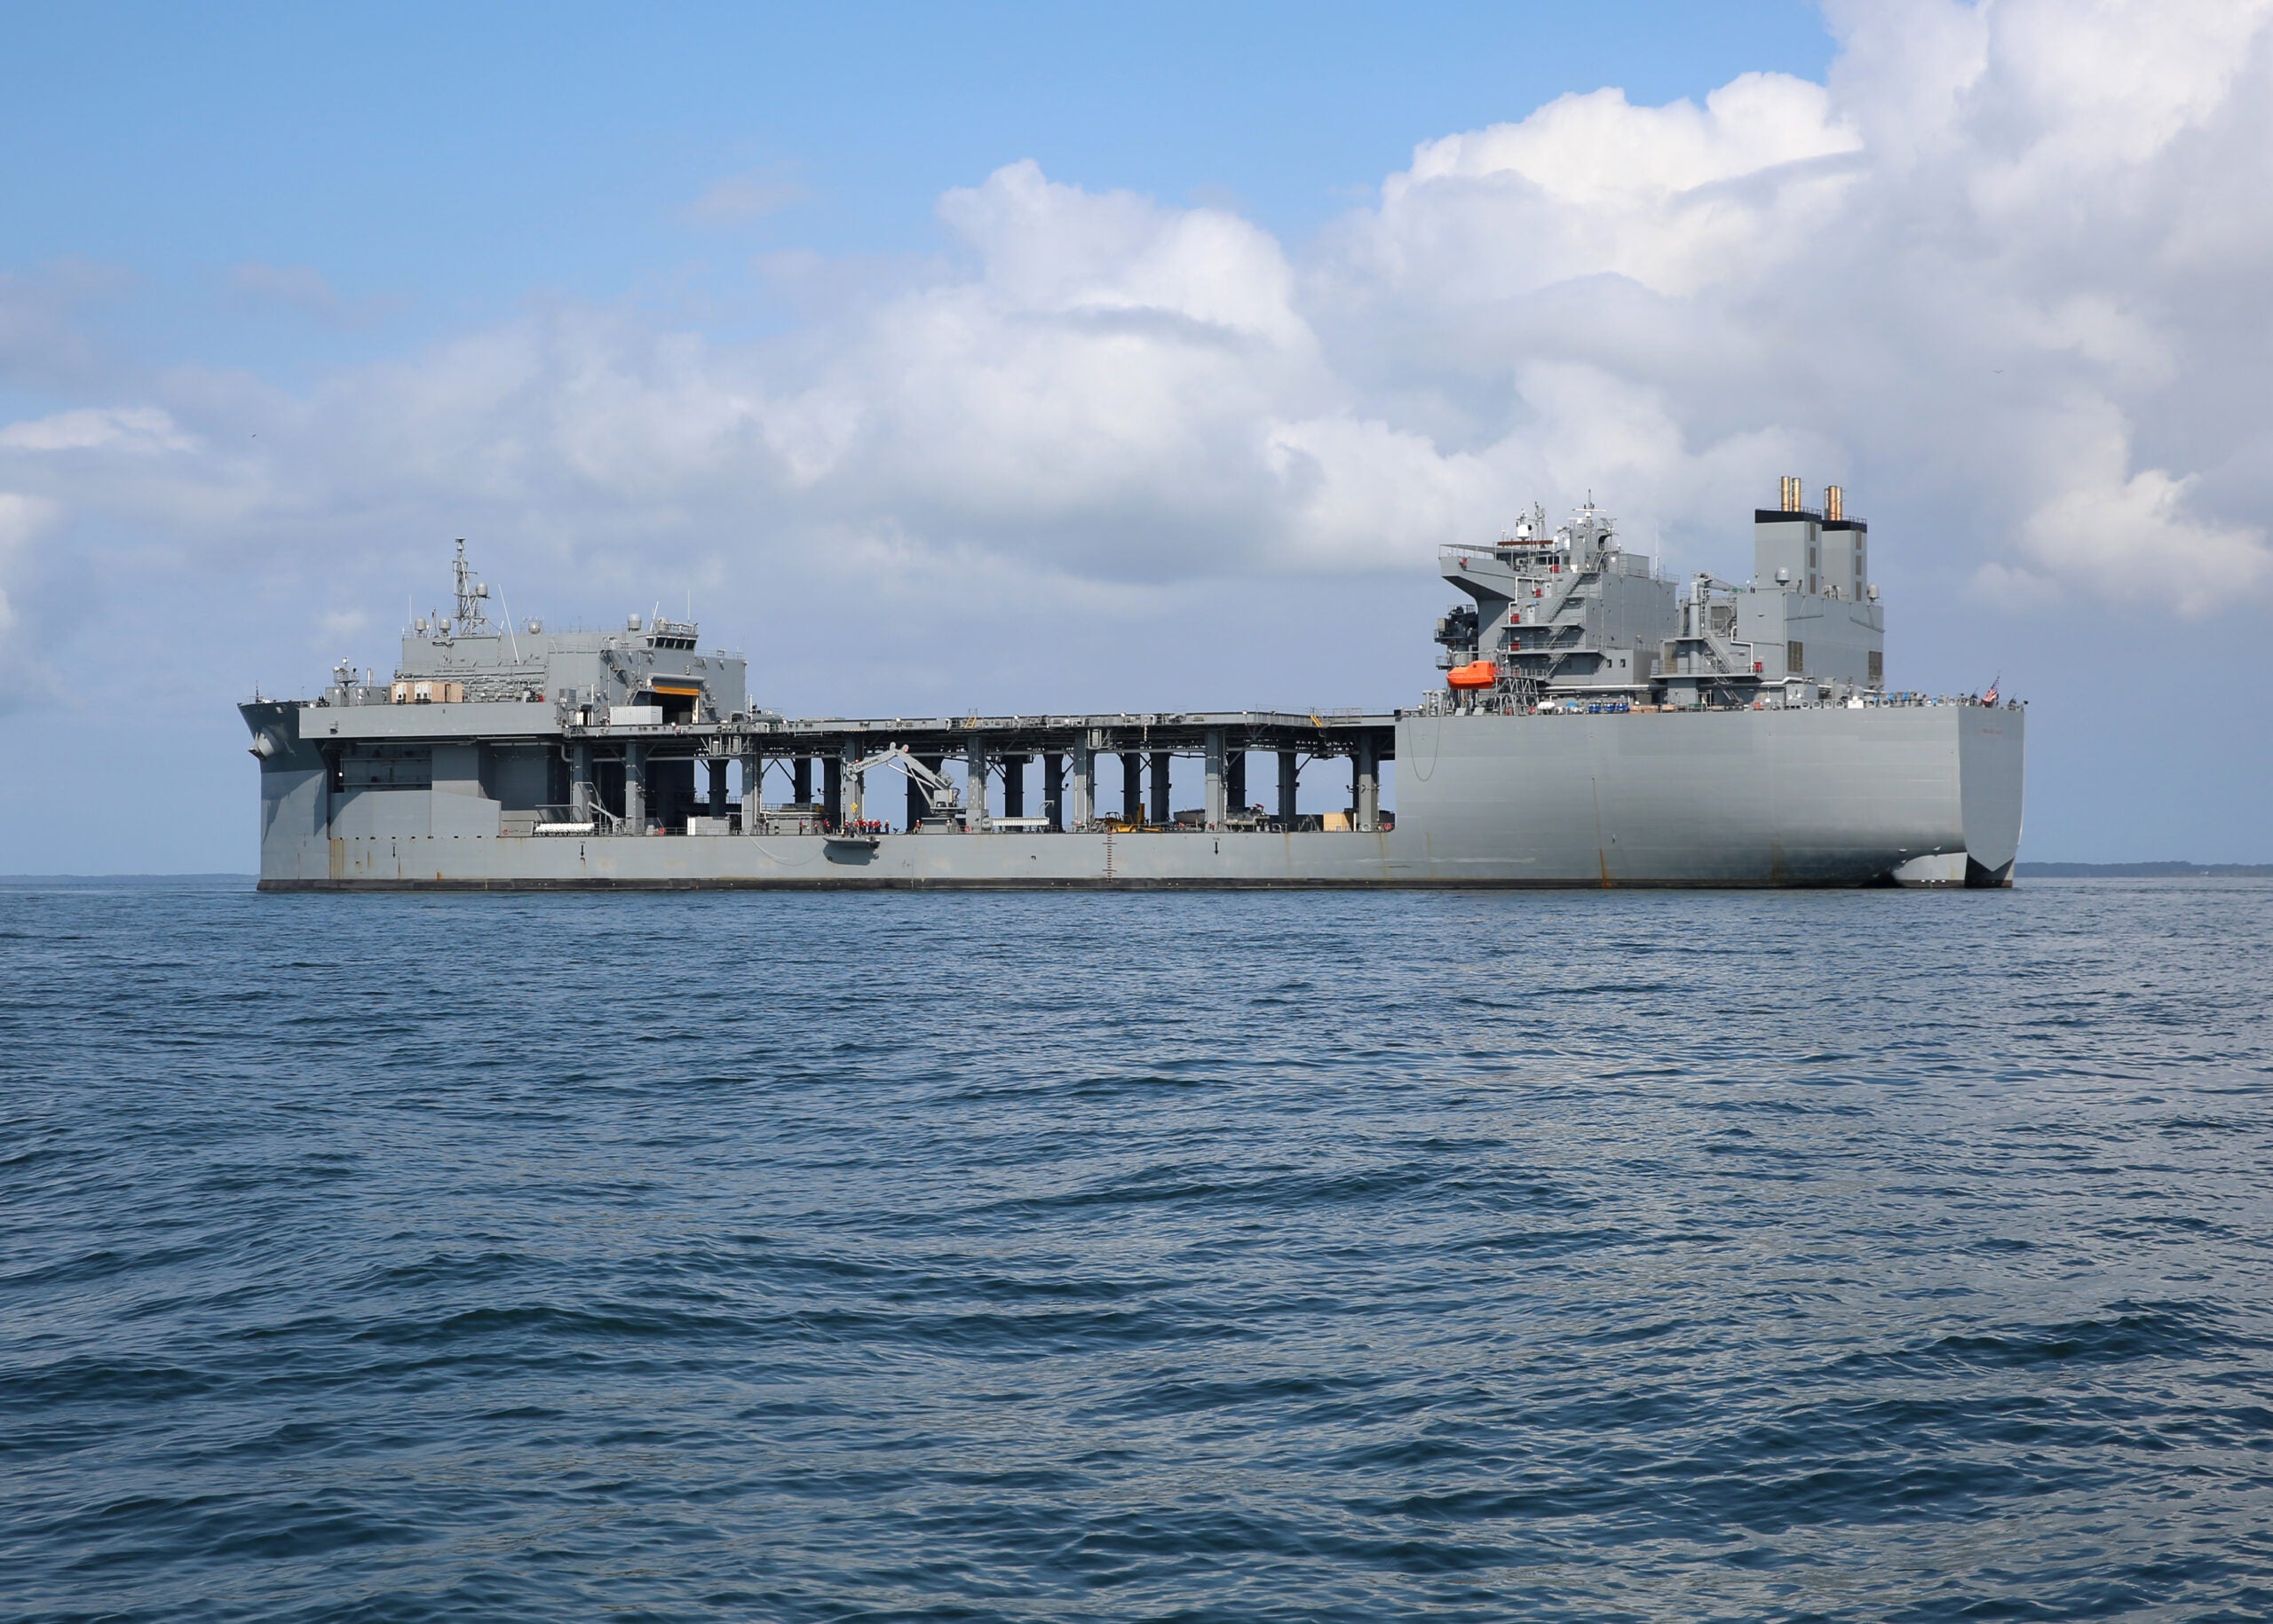 190915-N-OH262-0709 
CHESAPEAKE BAY (Sept. 15, 2019) The Military Sealift Command expeditionary sea base USNS Hershel 'Woody' Williams (ESB 4) is at anchor in the Chesapeake Bay, Sept. 15, 2019 during mine countermeasure equipment testing. (U.S. Navy photo by Bill Mesta/Released)